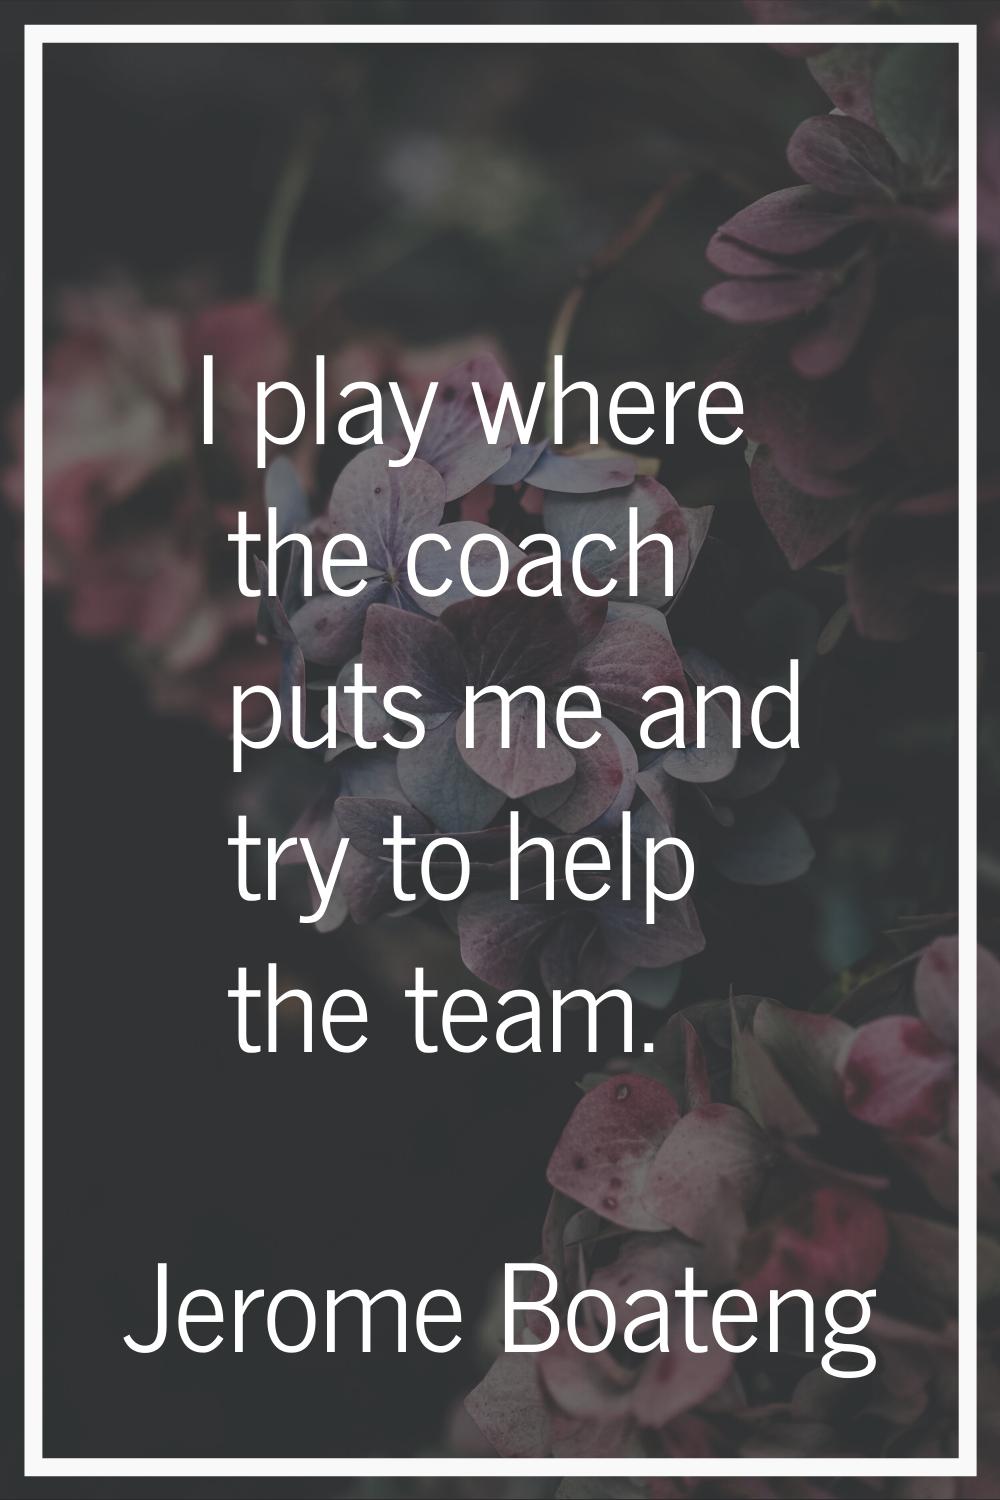 I play where the coach puts me and try to help the team.